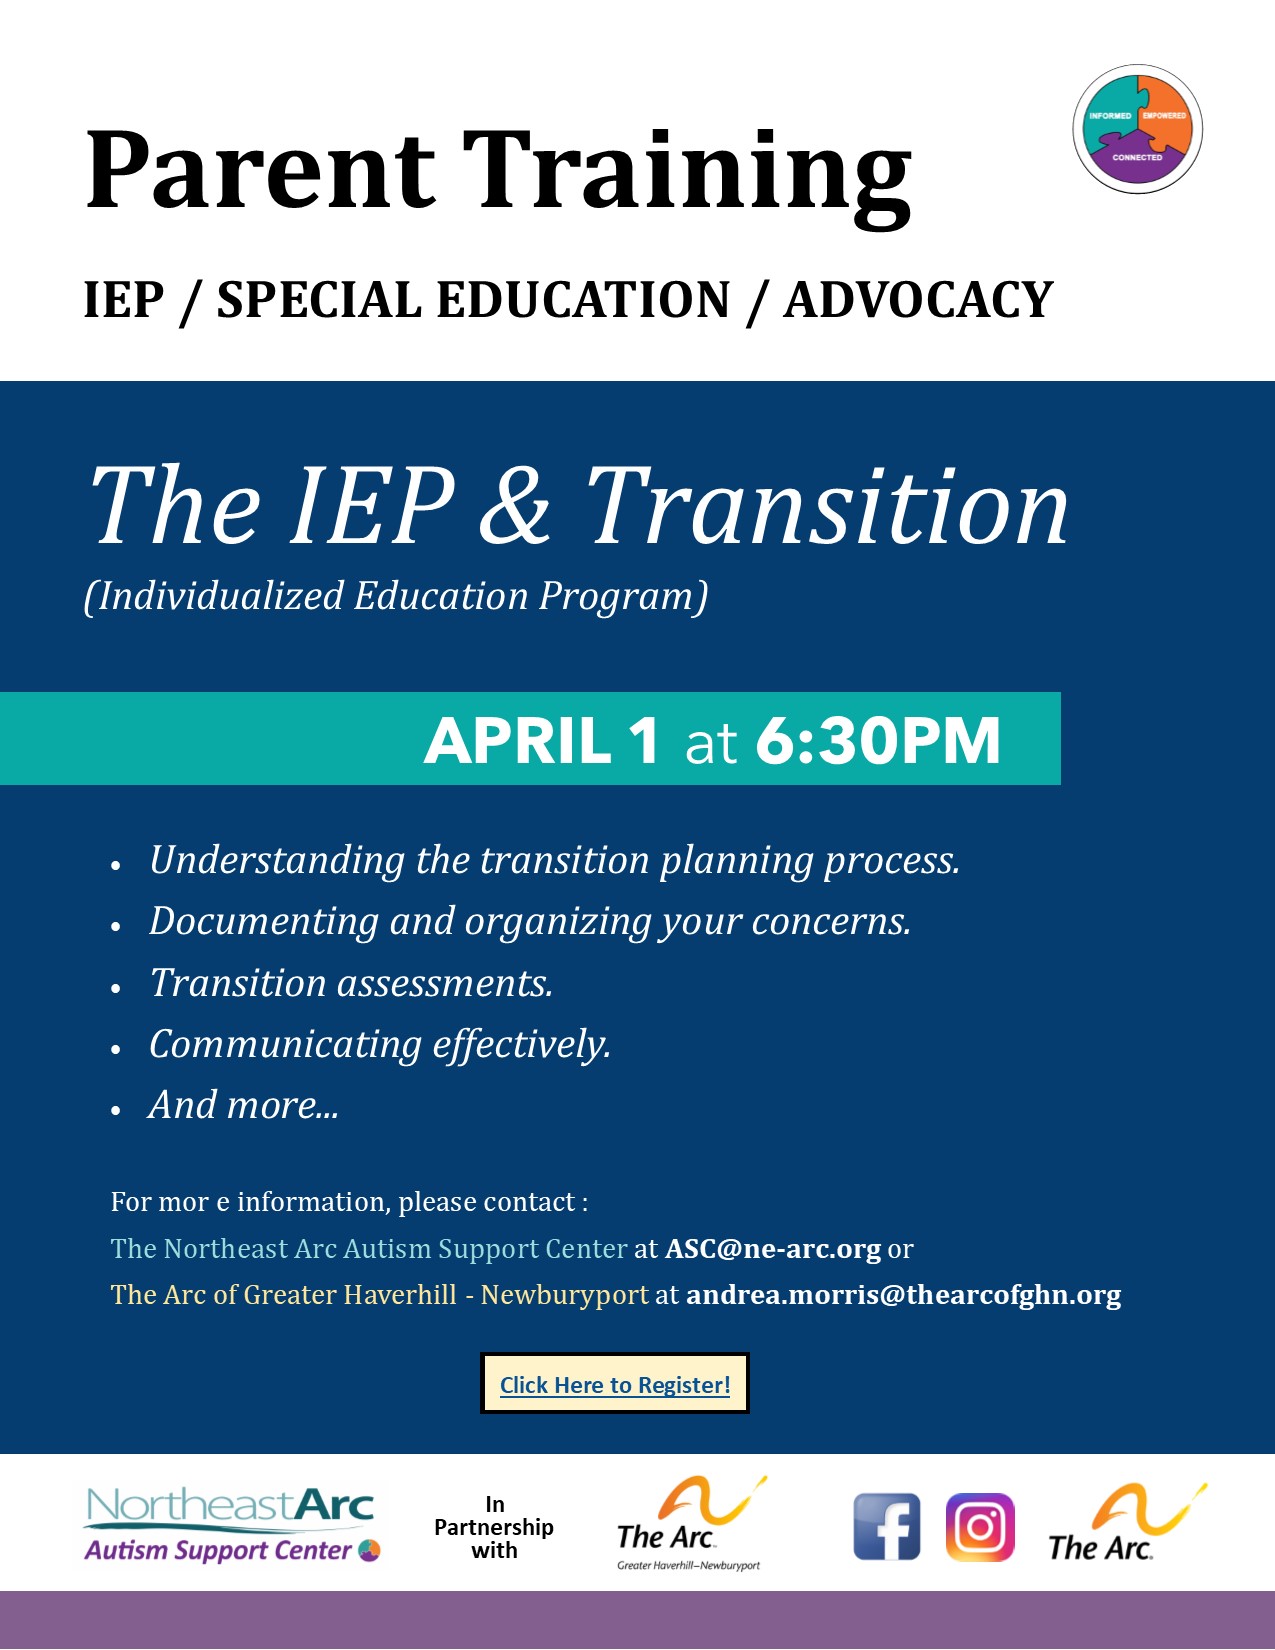 Virtual Parent Workshop on the Individualized Education Program (IEP) and Transition Planning